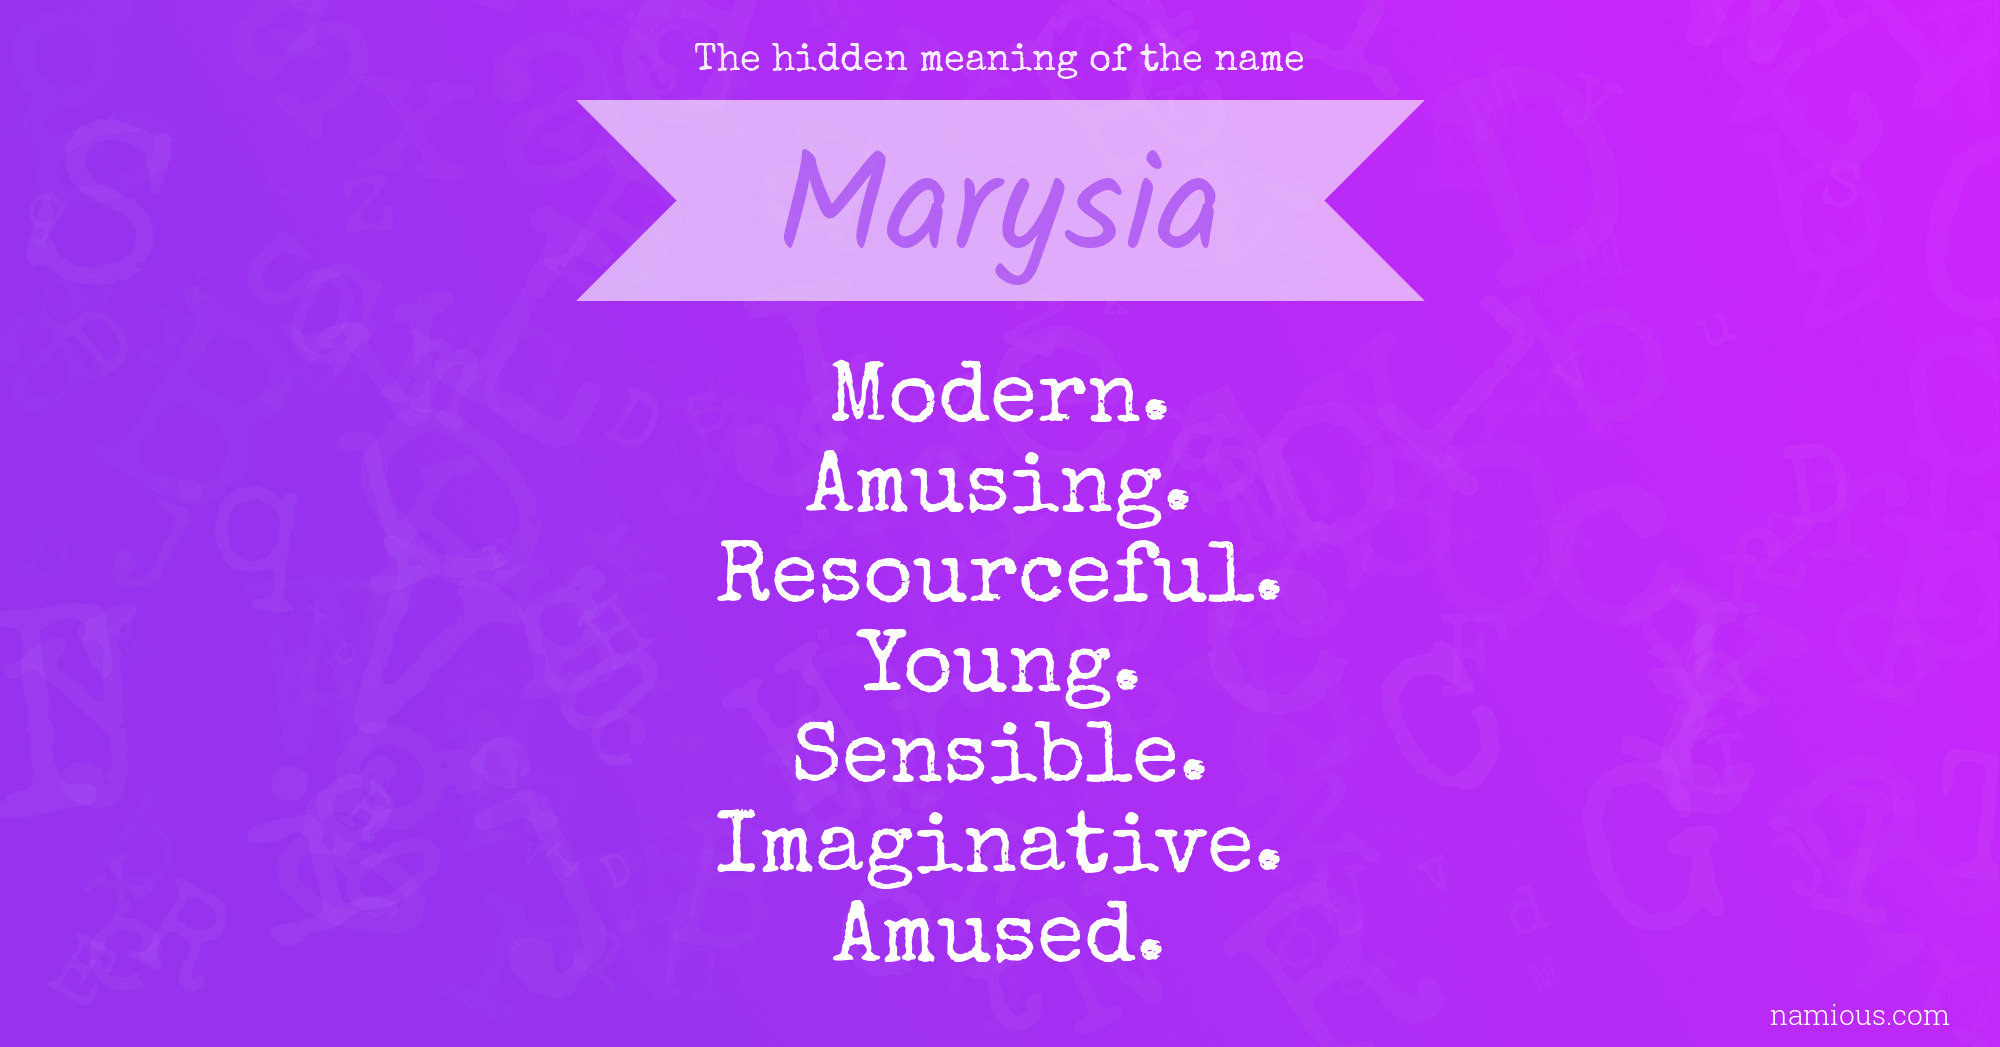 The hidden meaning of the name Marysia